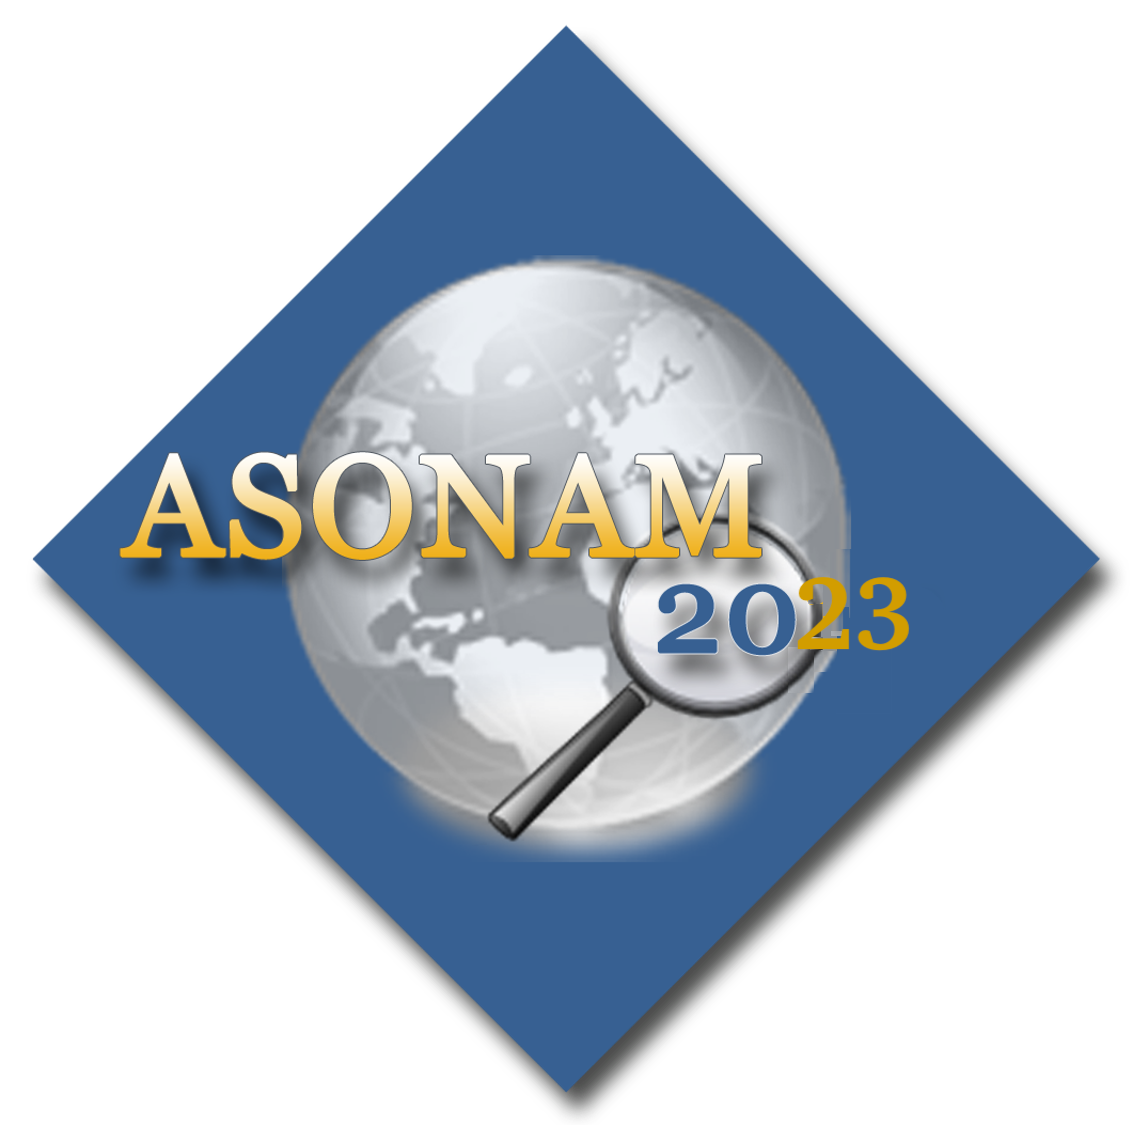 ASONAM 2023 (15th IEEE/ACM International Conference on Advances in Social Networks Analysis and Mining)